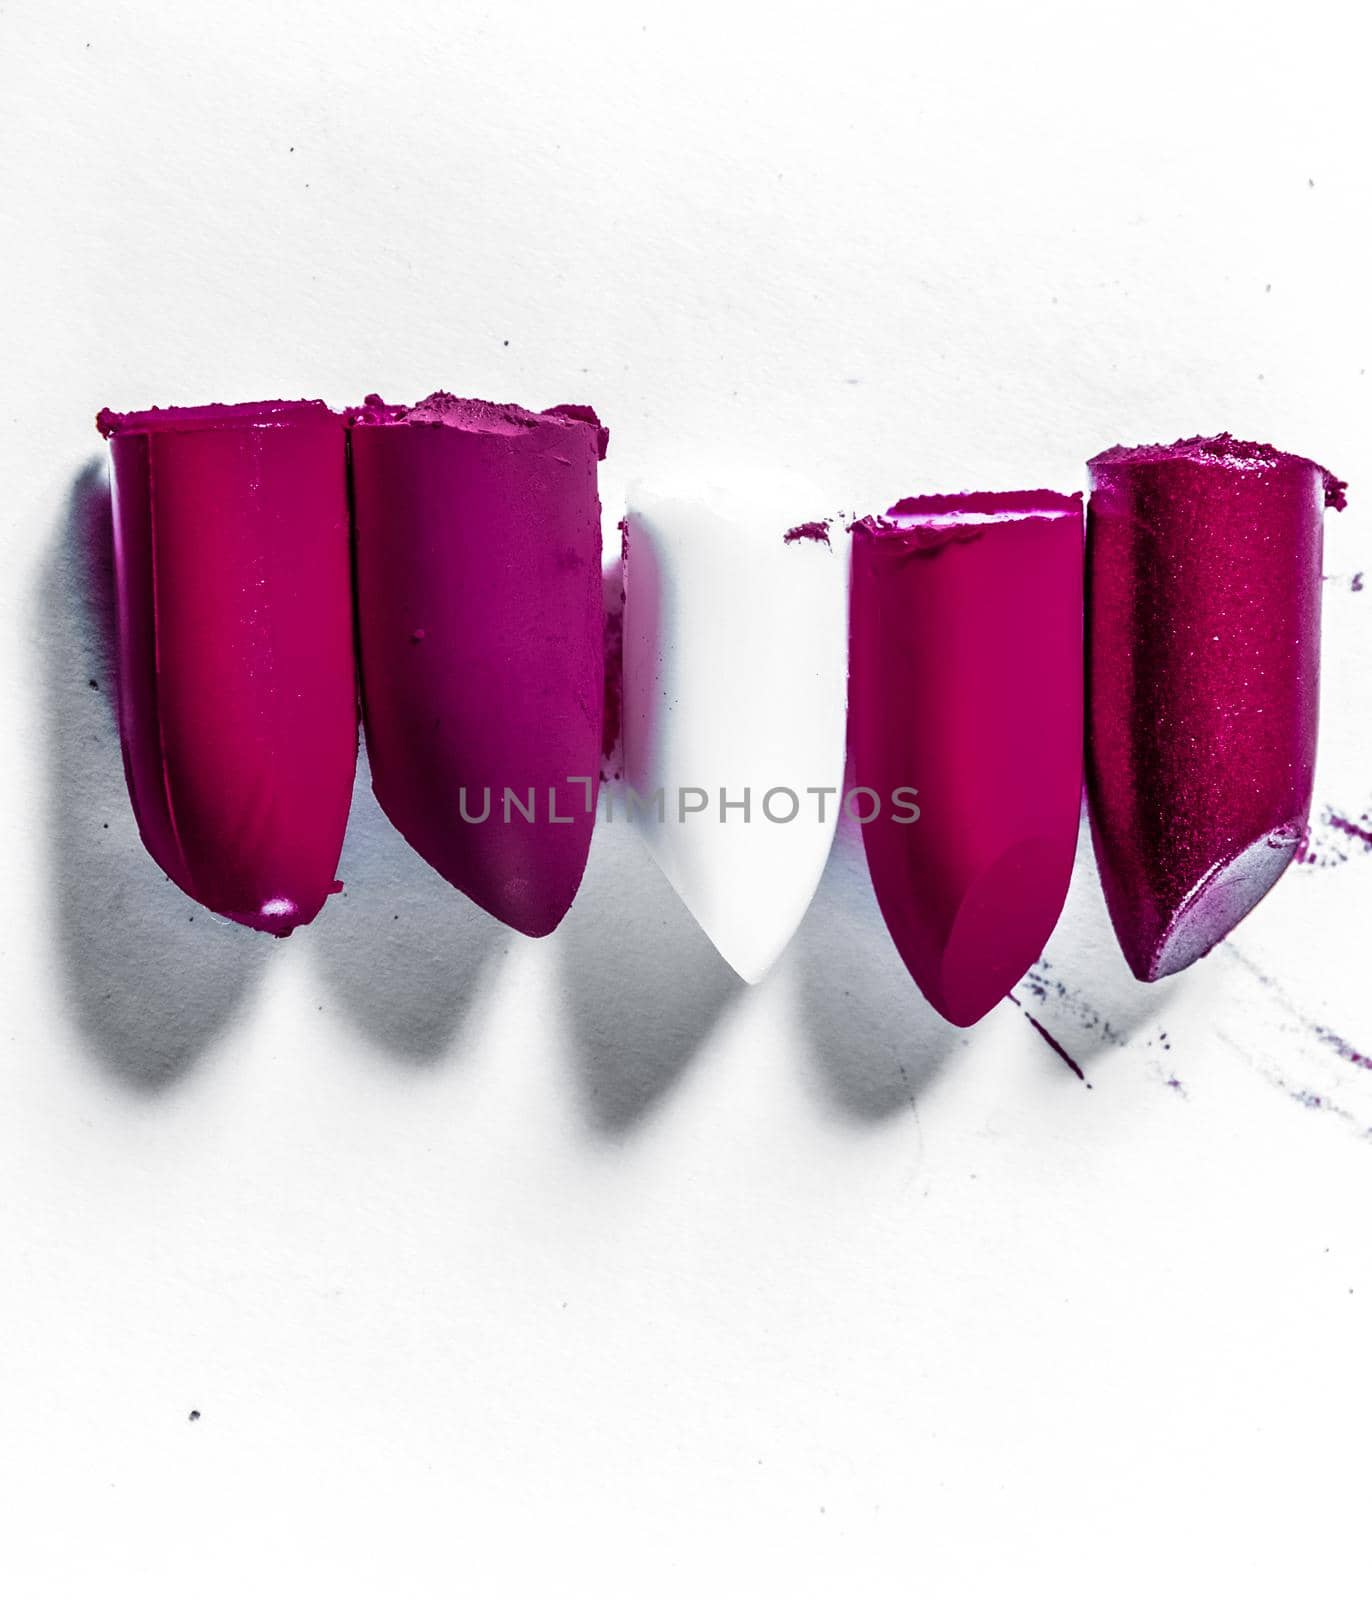 Beauty texture, cosmetic product and art of make-up concept - Cutted lipstick close-up isolated on white background